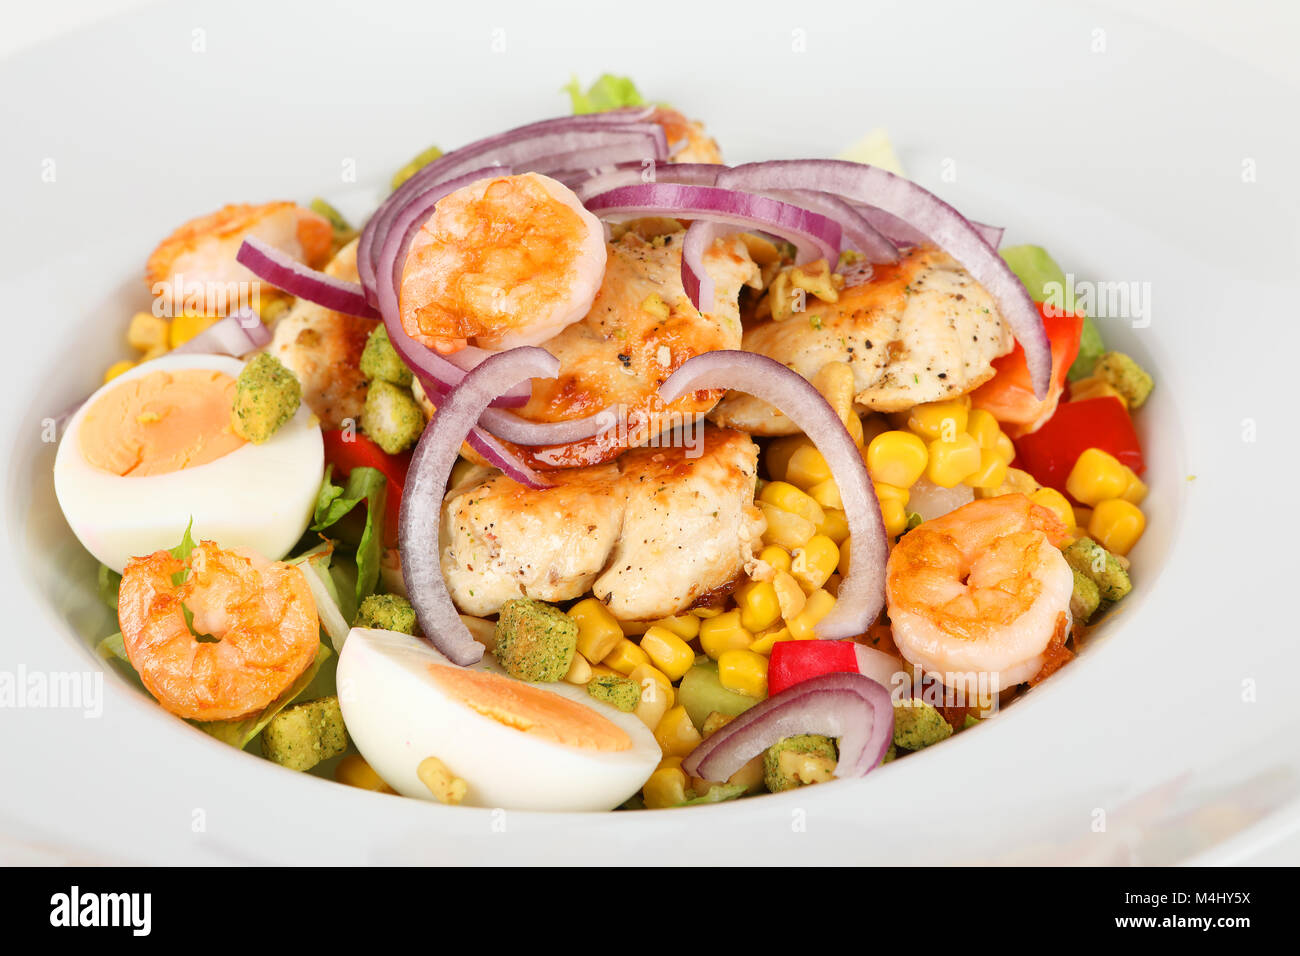 mixed salad with chicken Stock Photo